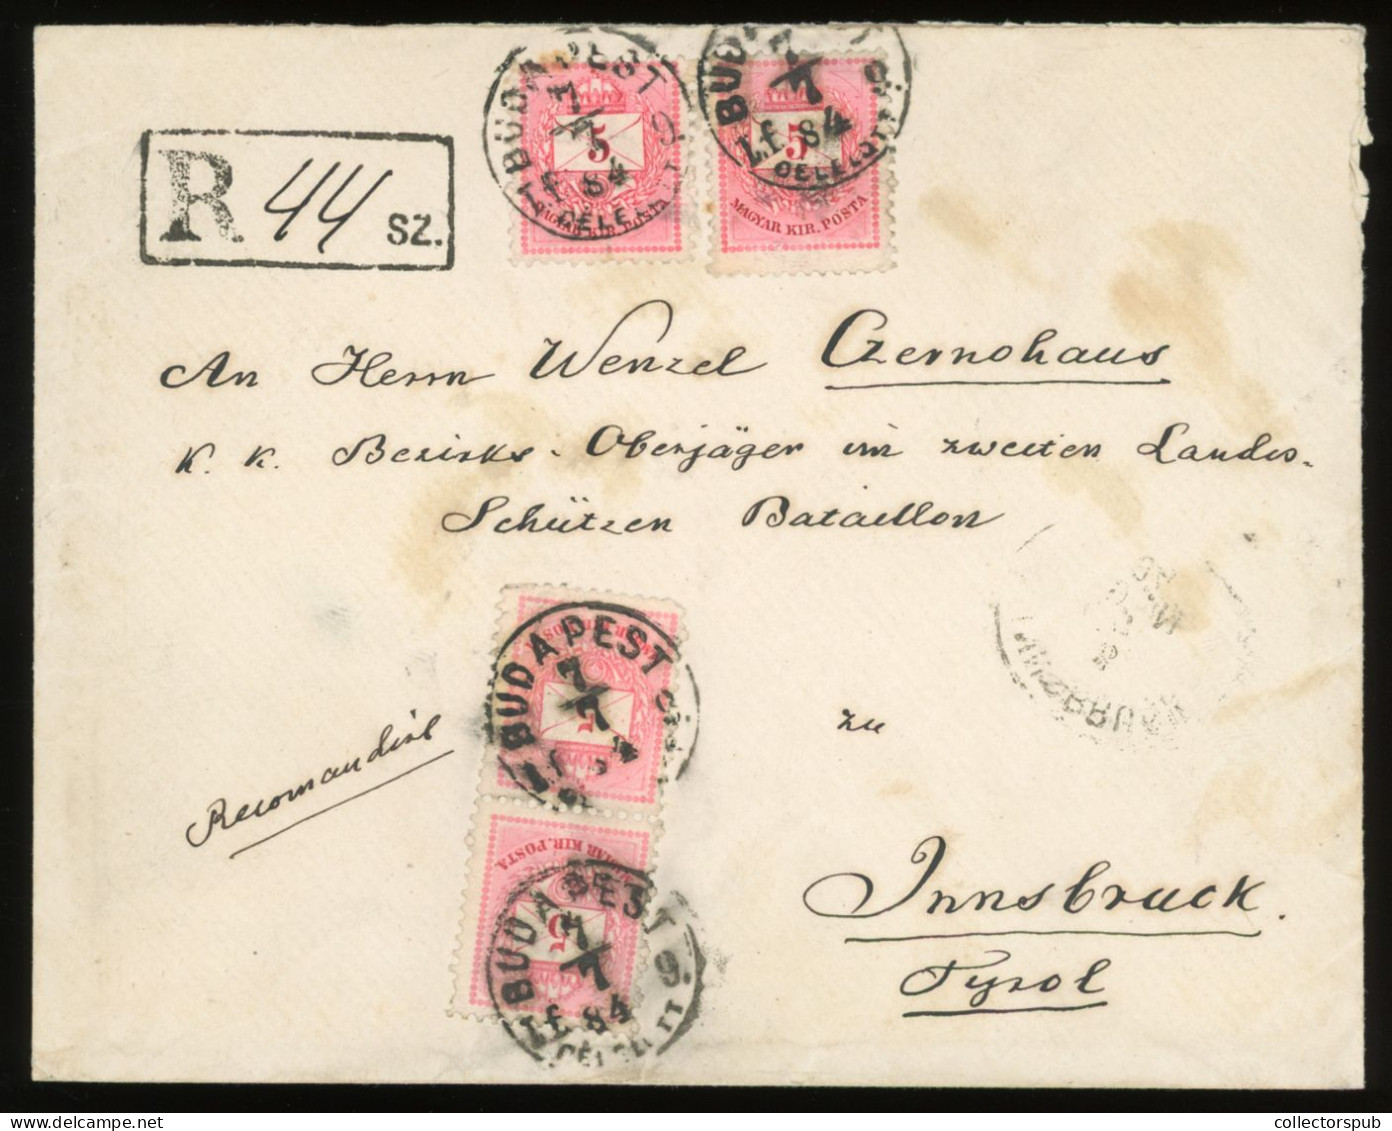 HUNGARY BUDAPEST 1884. Nice Registered Cover To Innsbruck - Covers & Documents